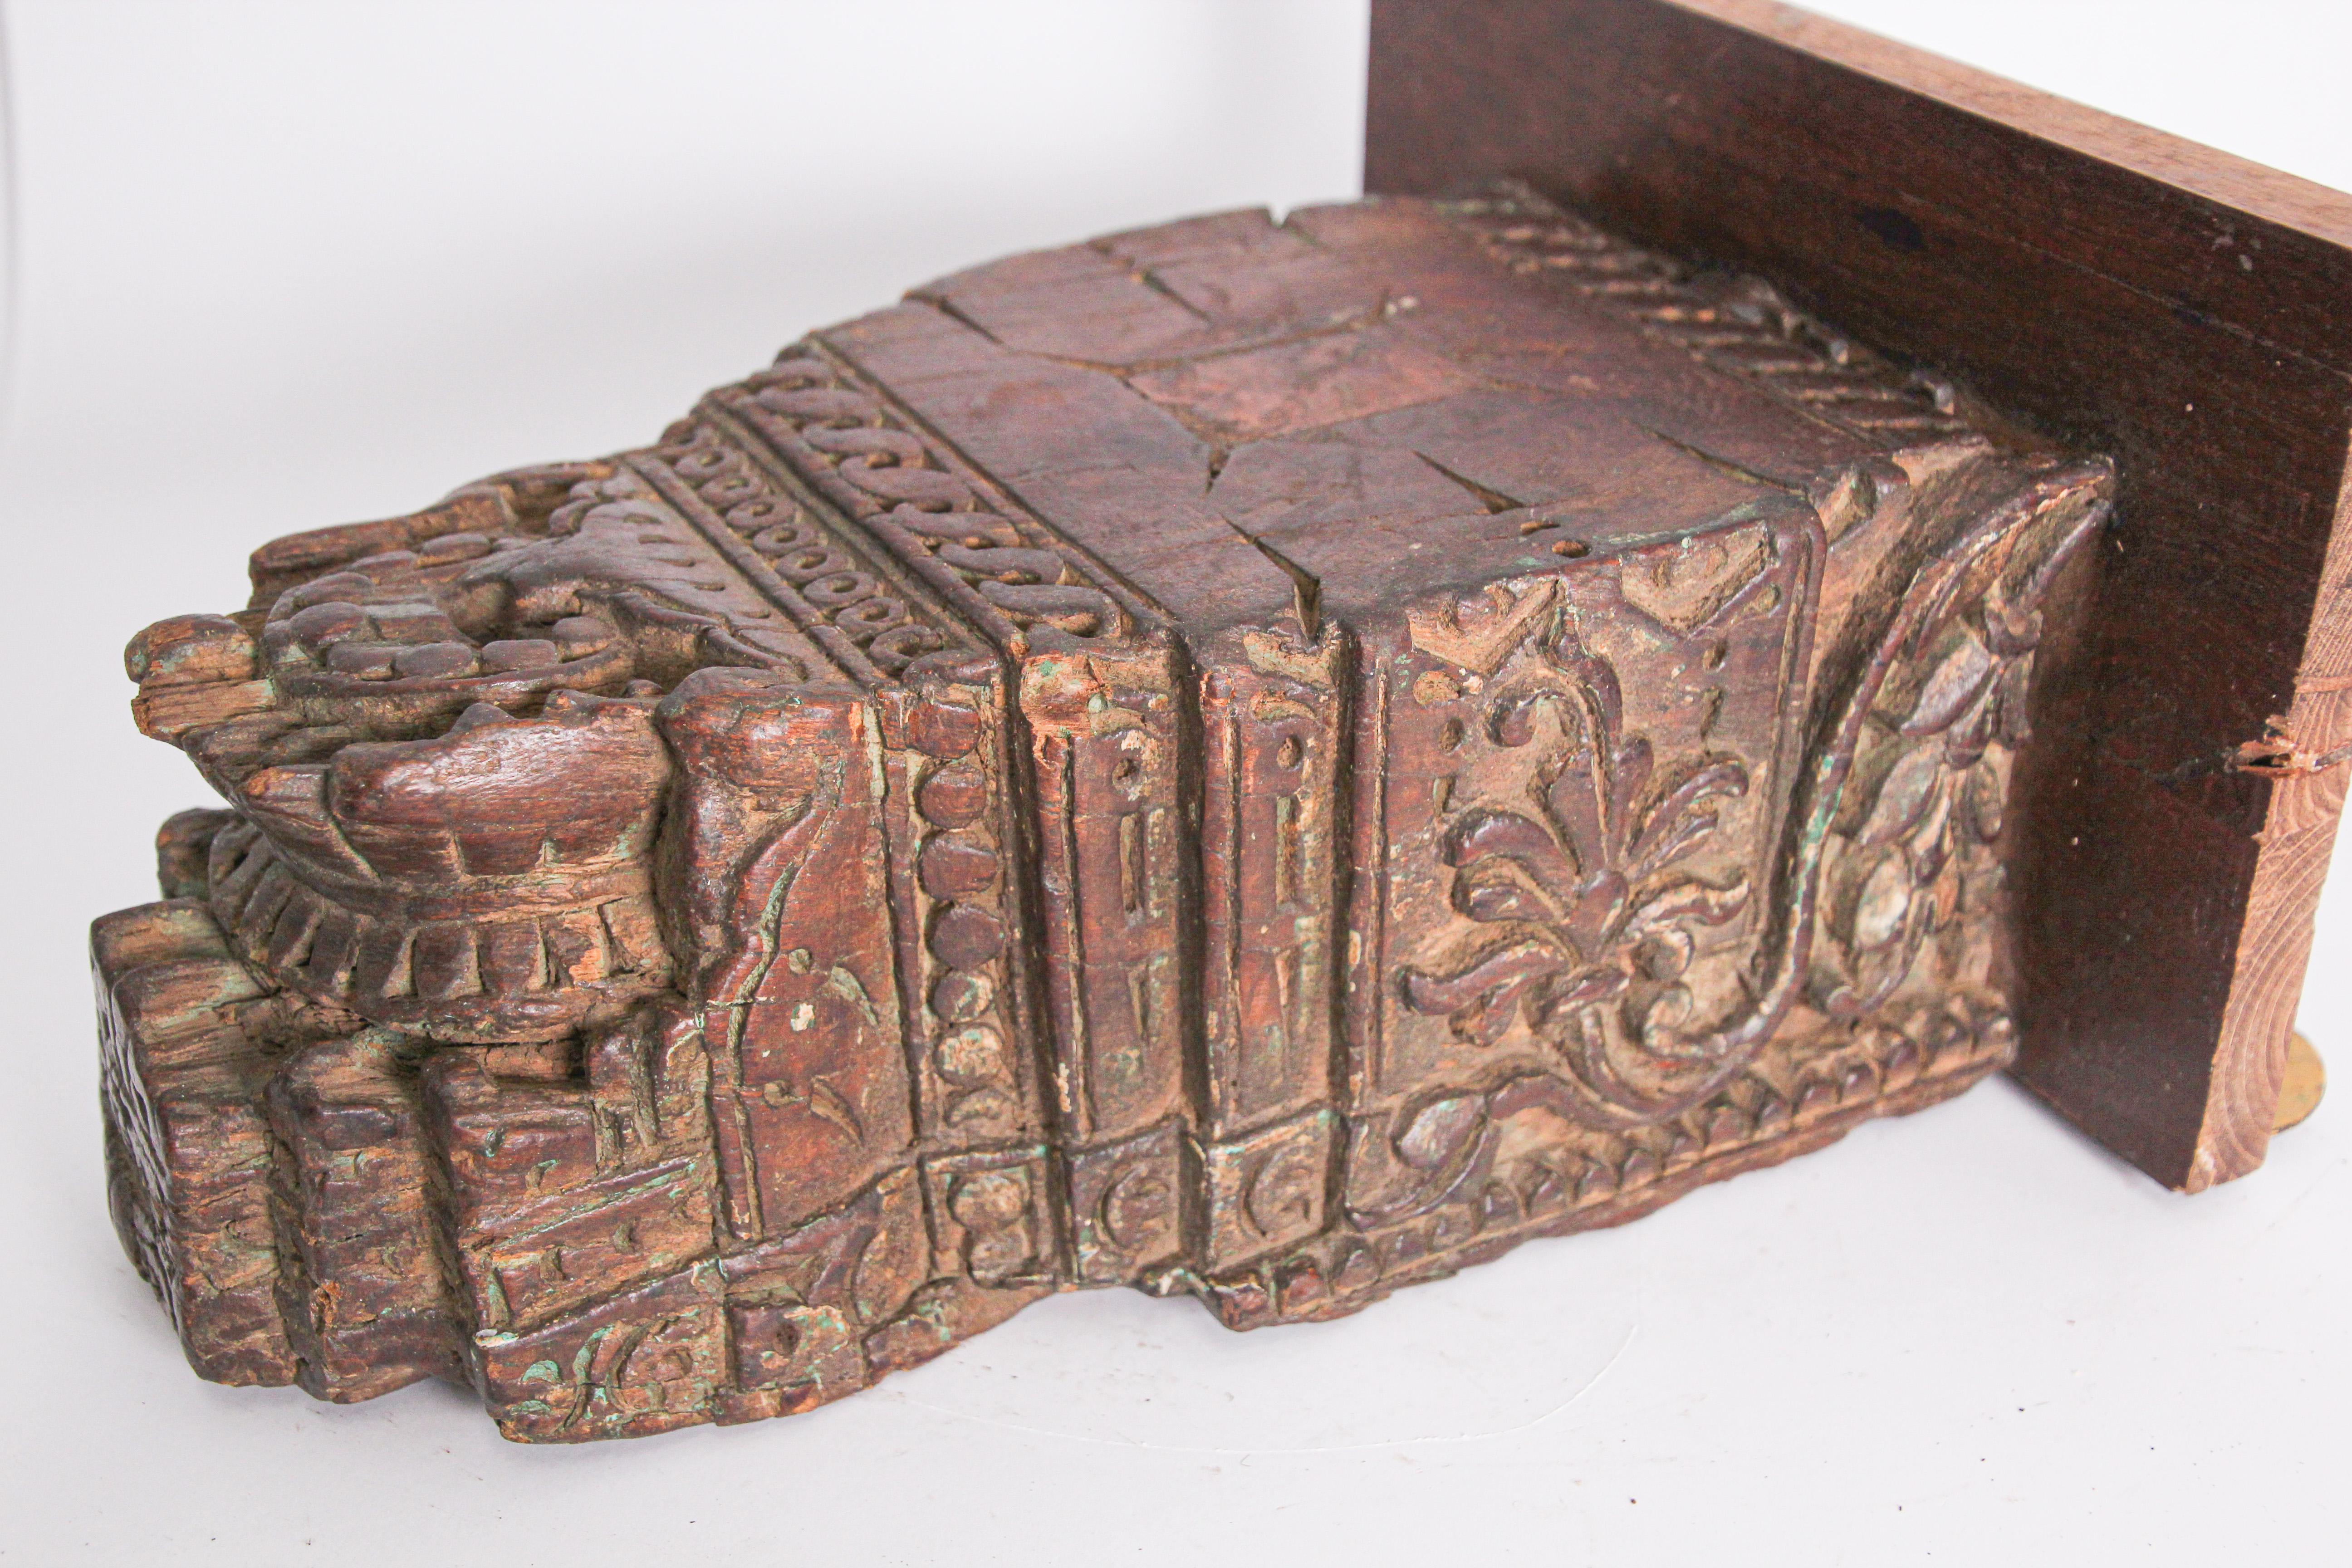 Antique architectural carved wood temple fragment from Rajasthan, India.
19th century Hindu temple fragment. This antique fragment were elements of a section of hand carved wood frieze, within a temple in India. Mounted on a custom-made,